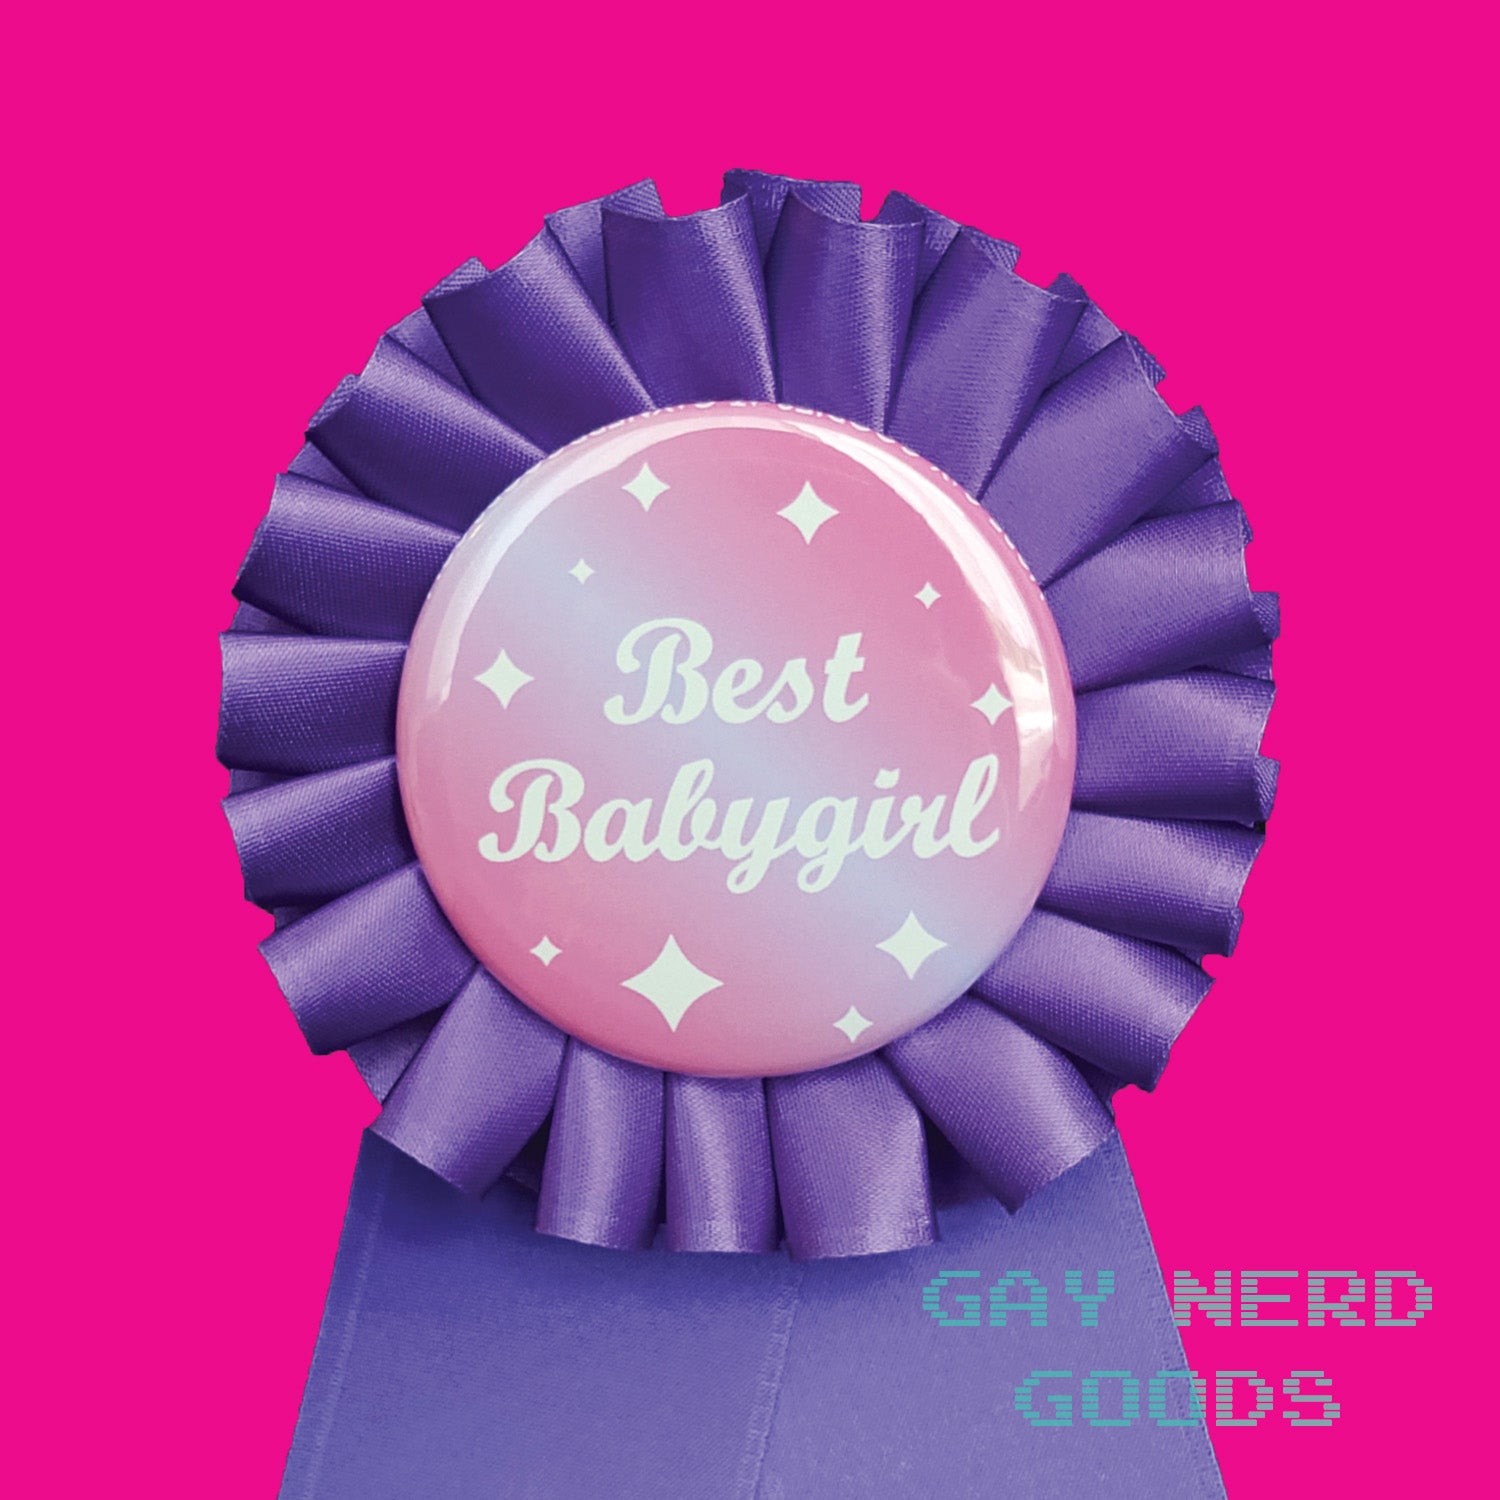 close up detail shot of the "best babygirl" award rosette. The text is white cursive with white sparkles on a pink and purple gradient background. The satin ribbon is purple